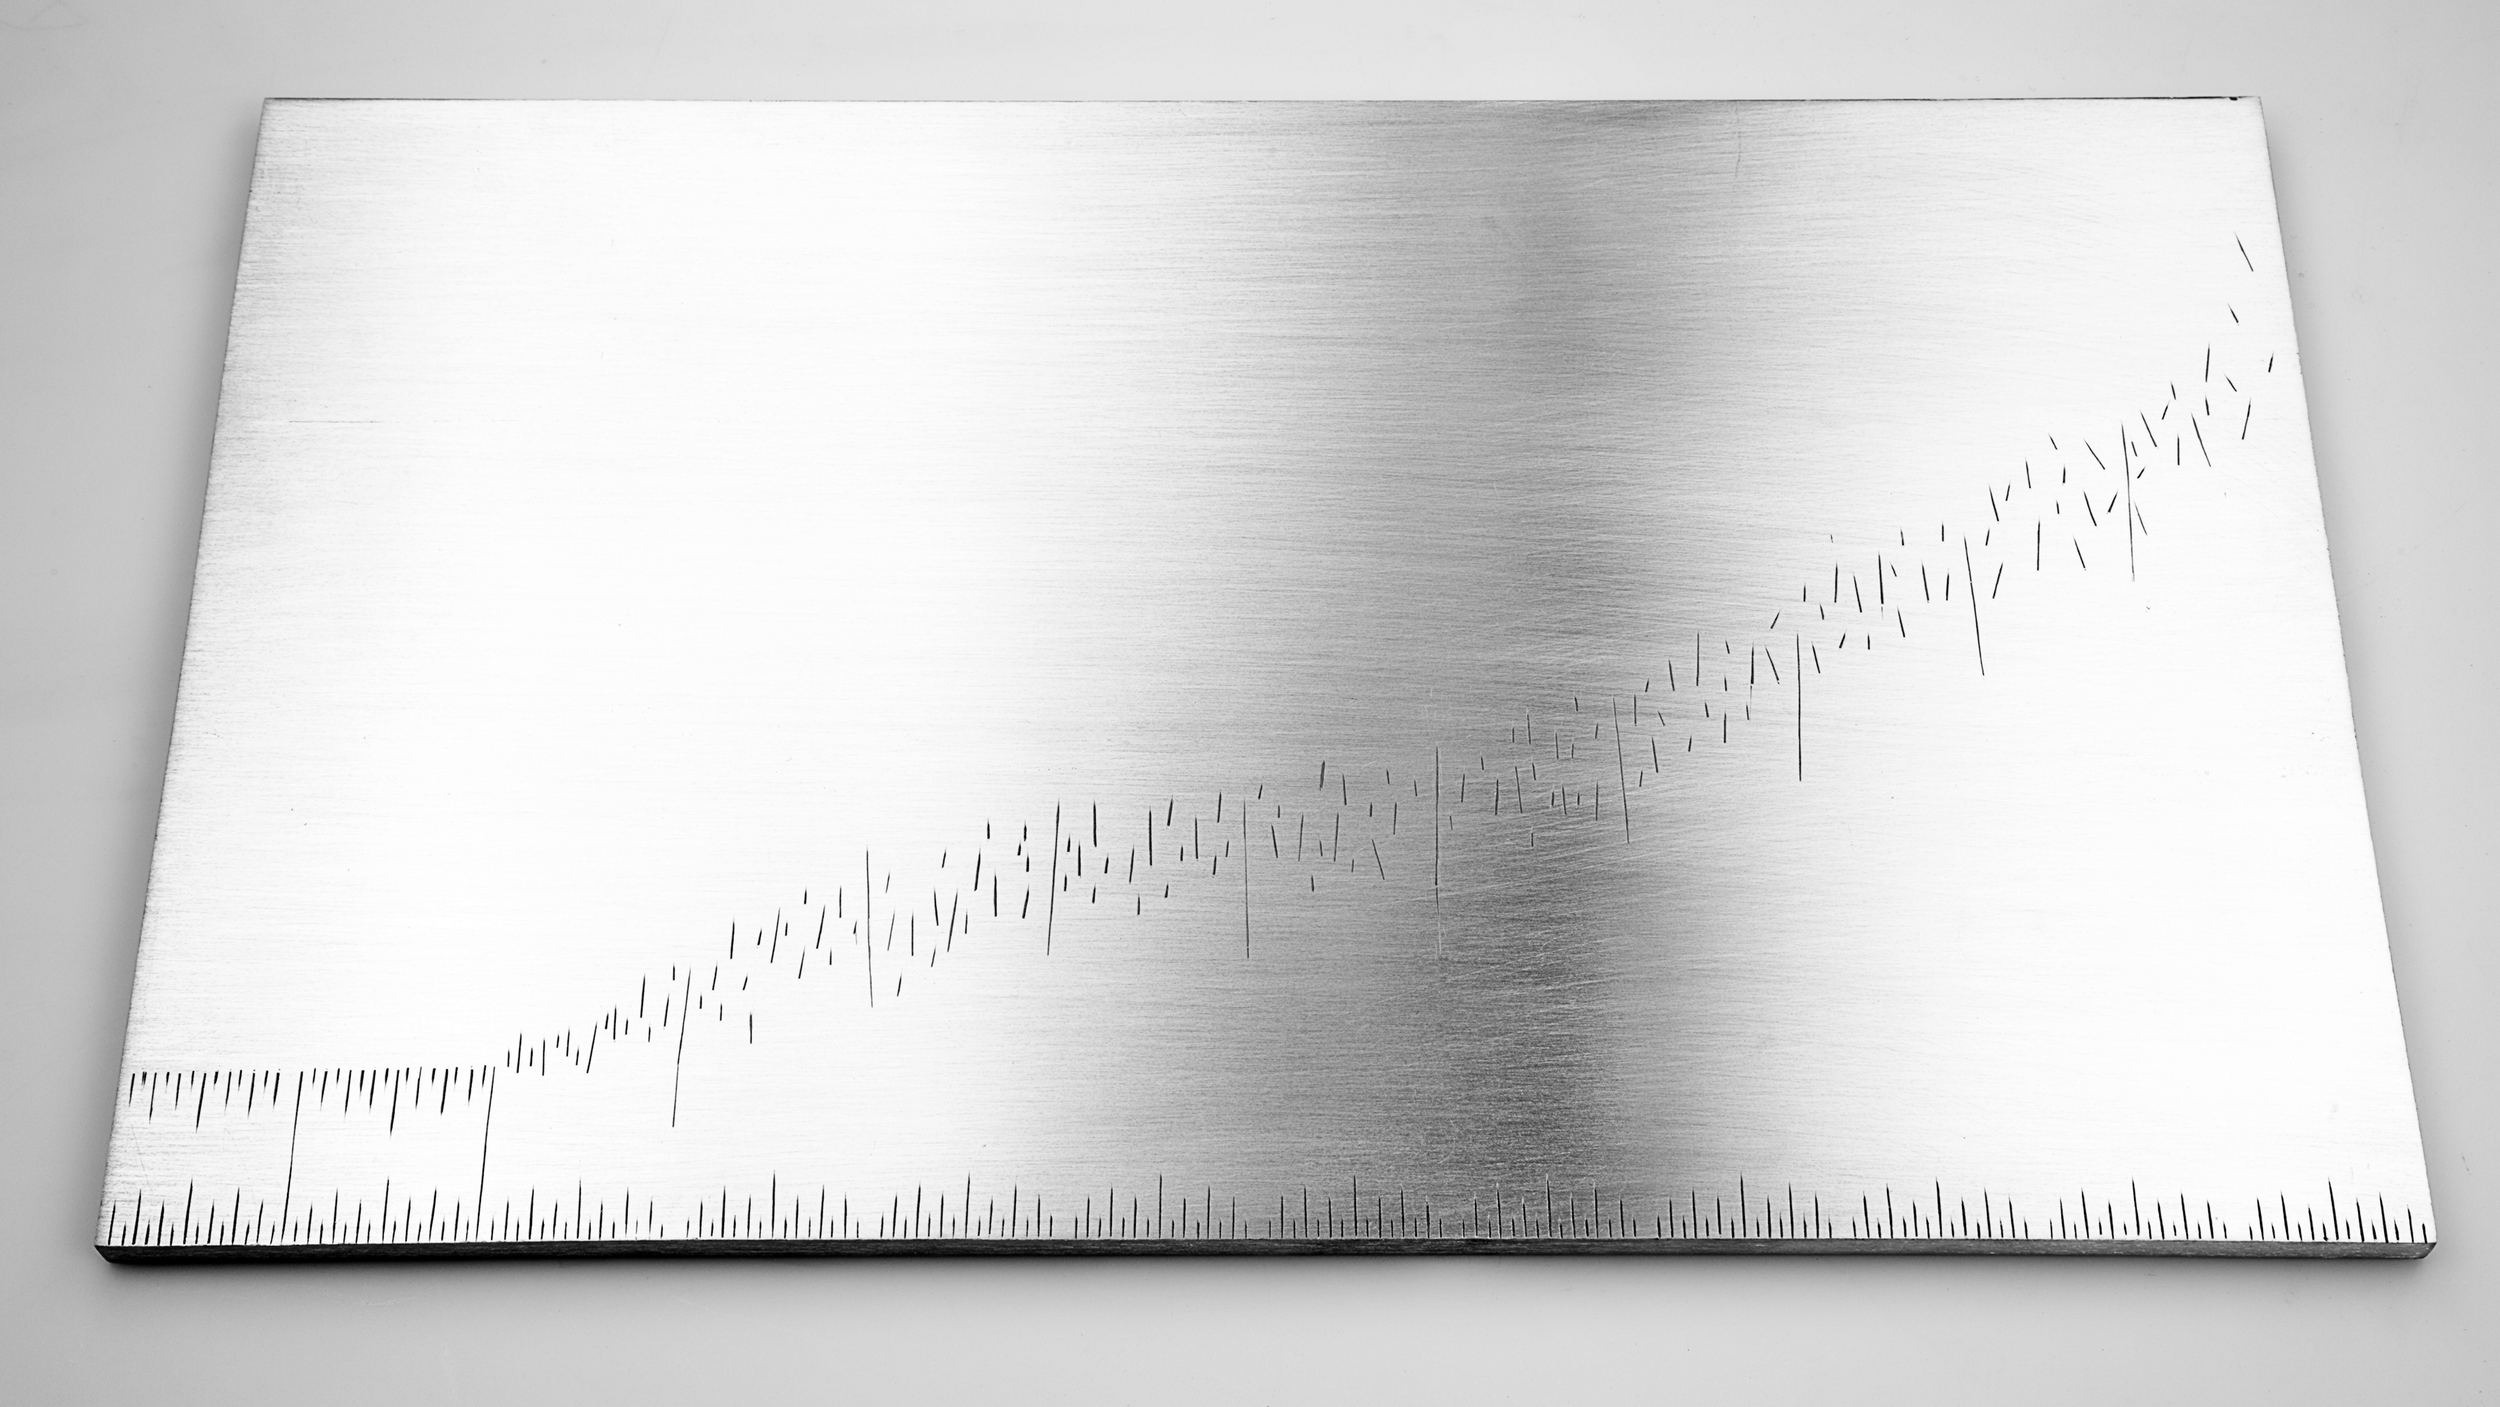 Instrument #147, hand engraved aluminum and ink, 11.875" x 7.125" x .25"